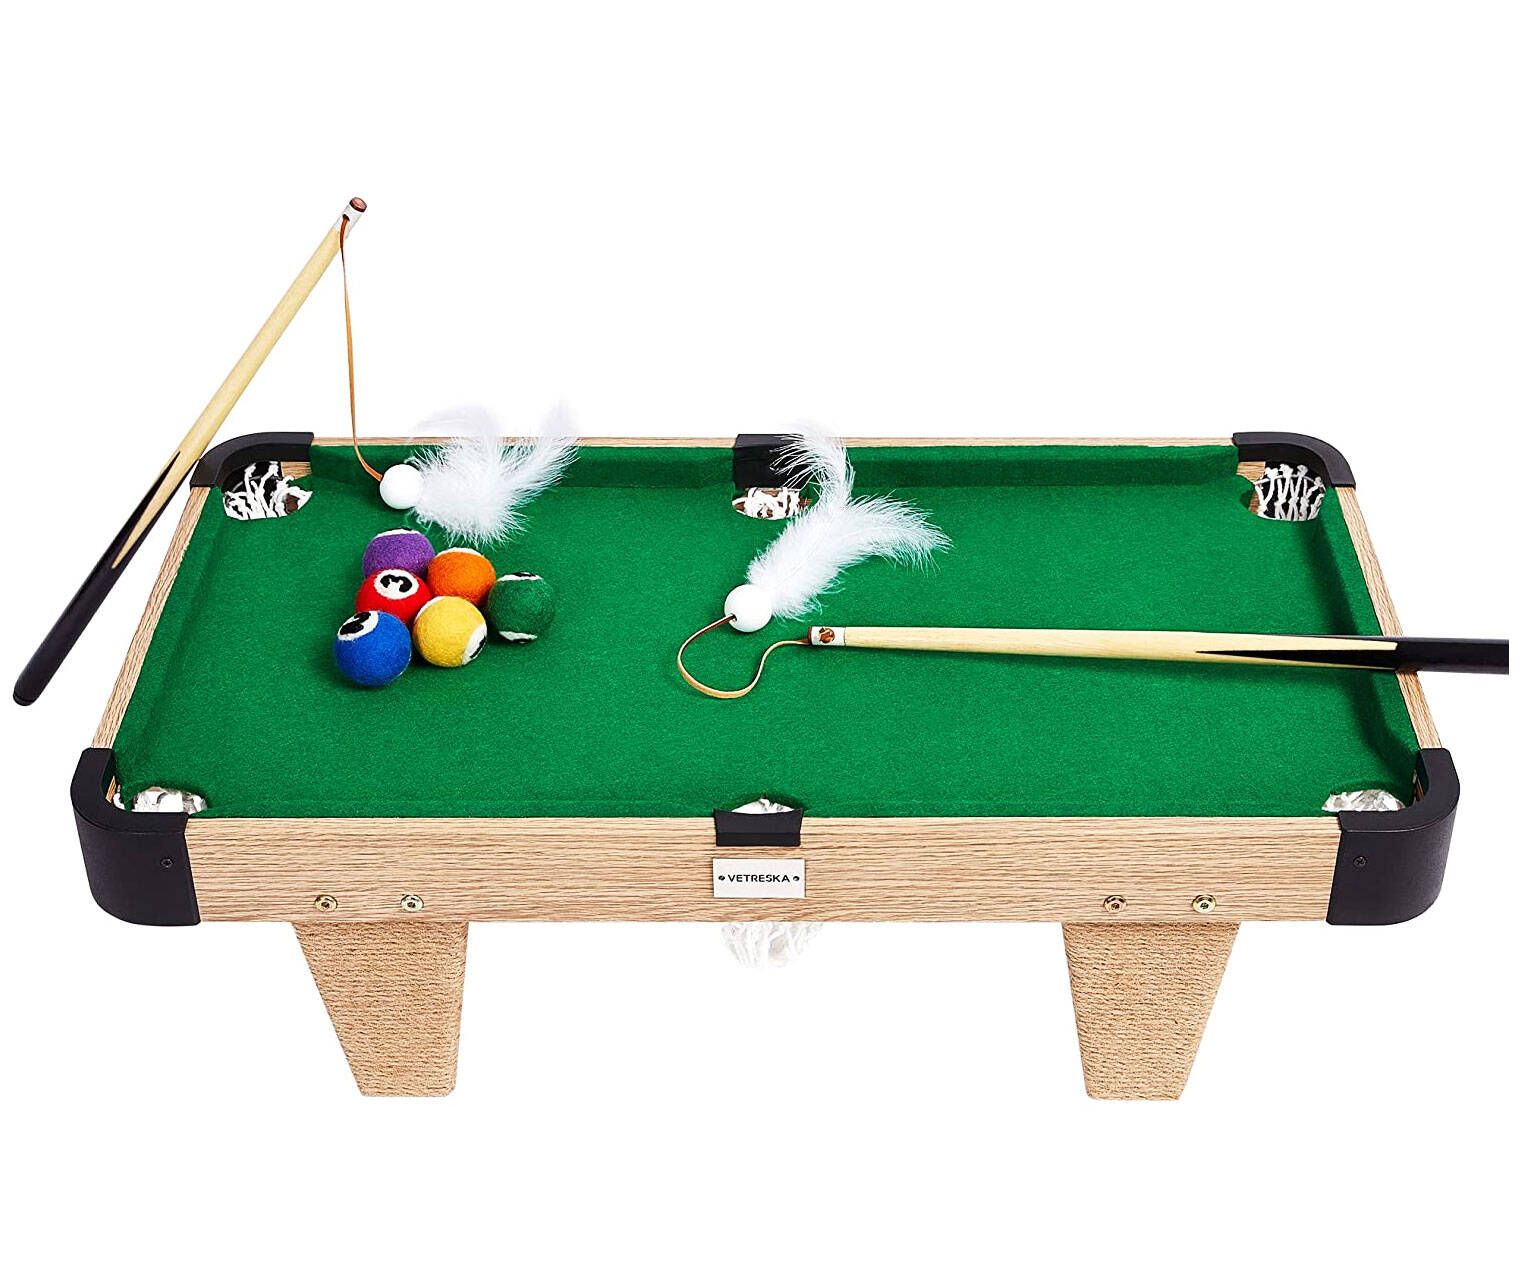 Cat Billiards Table - //coolthings.us